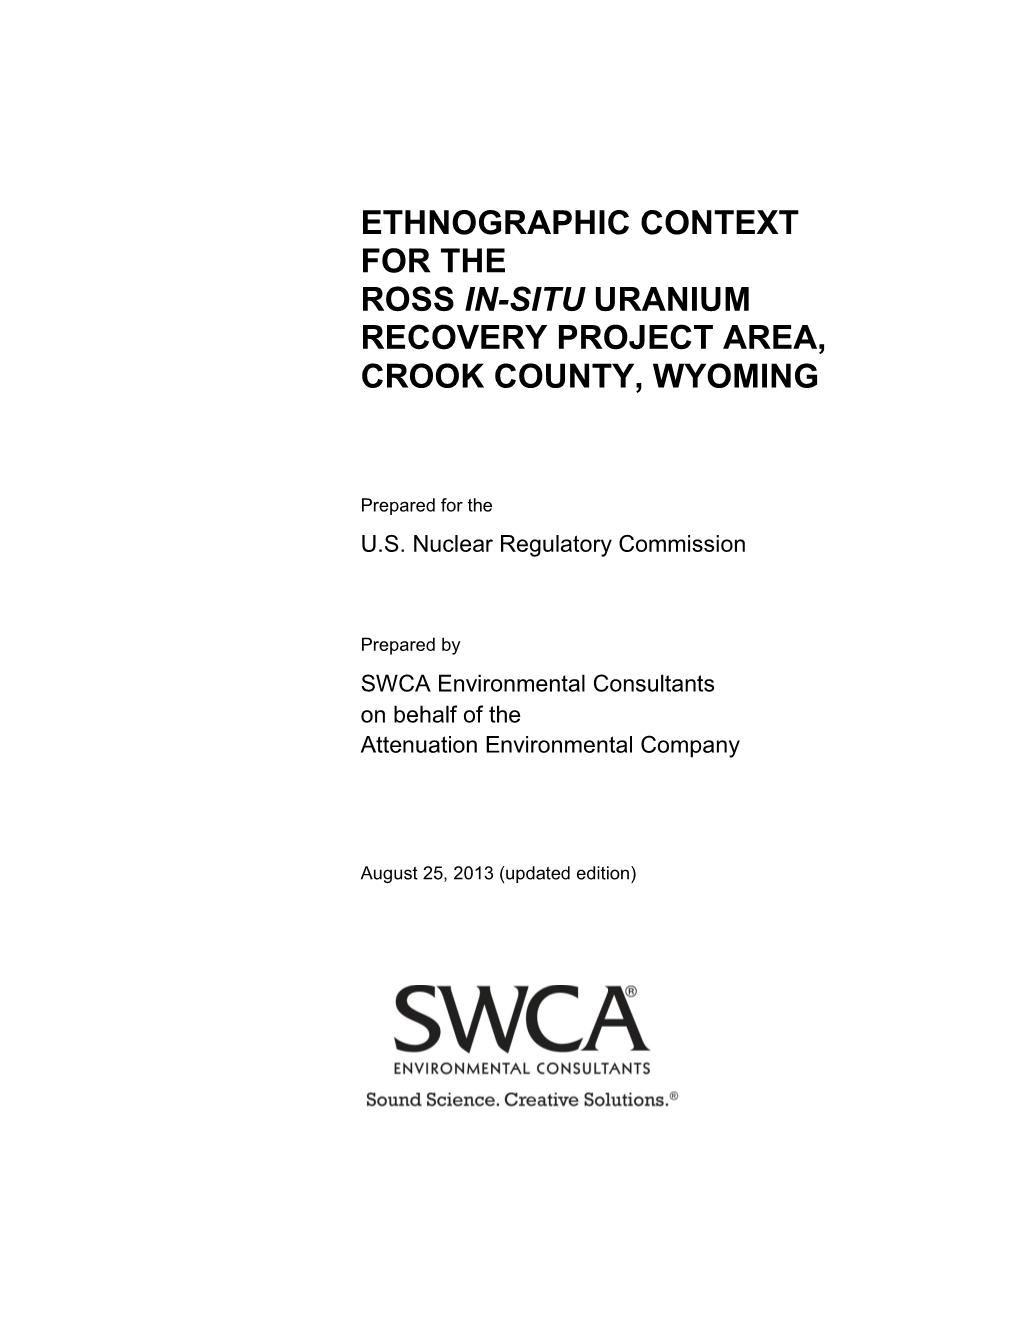 Final Ethnographic Context for the Ross Project